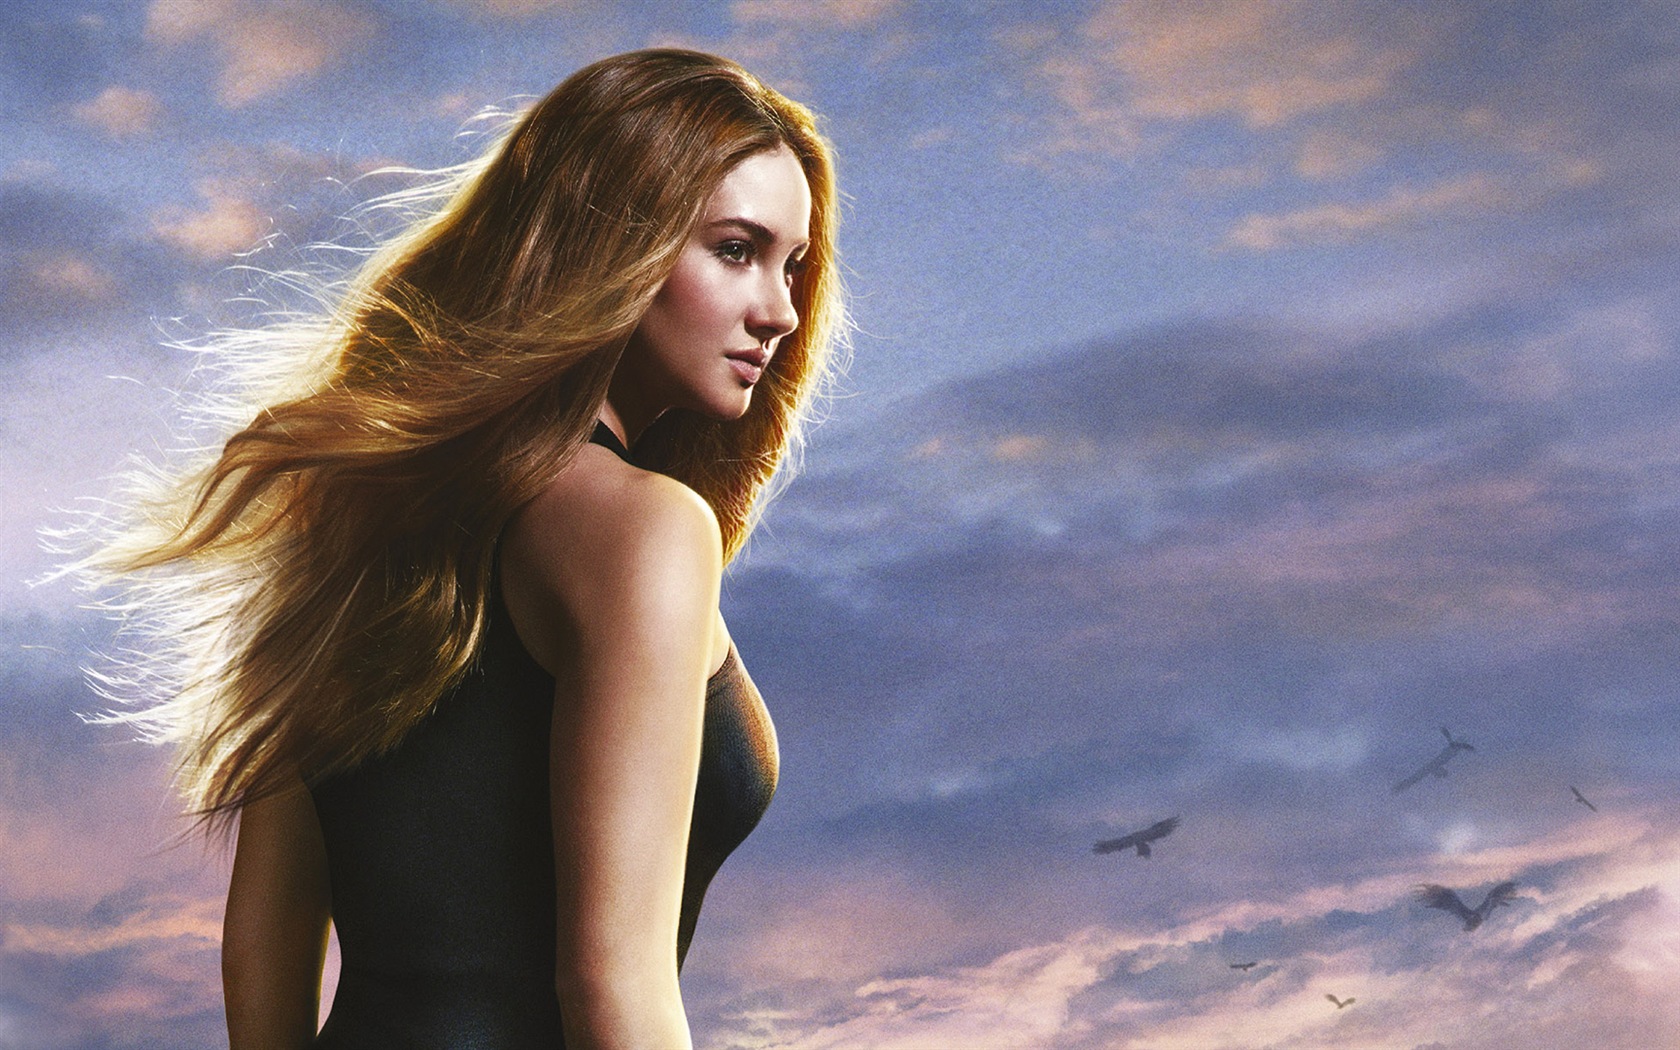 Divergent movie HD wallpapers #11 - 1680x1050